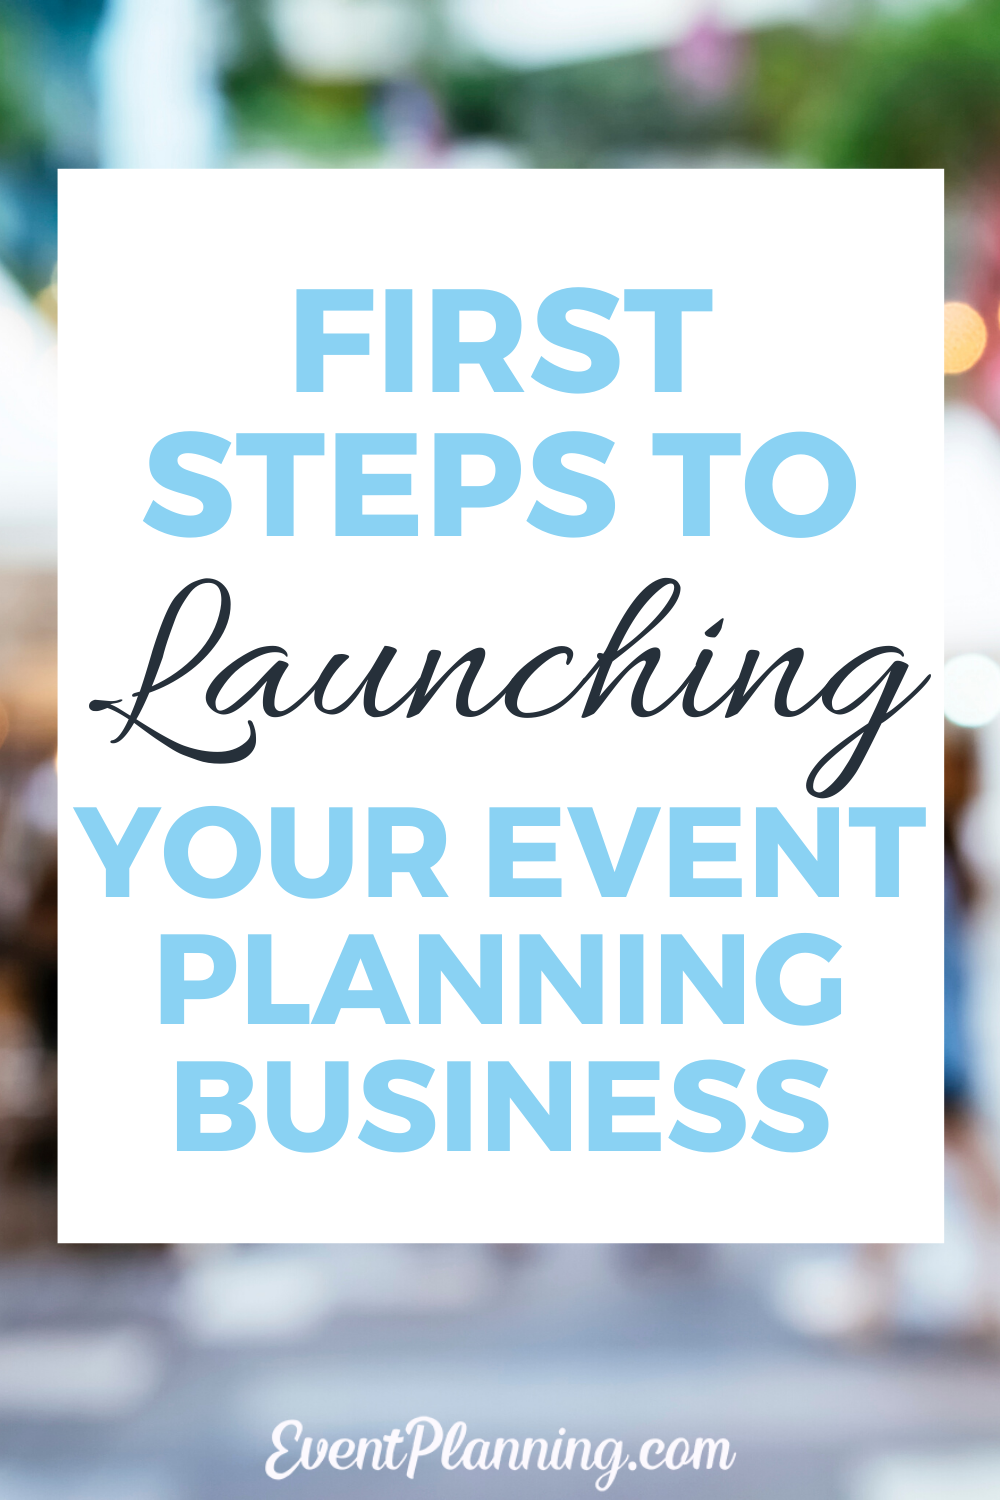 First steps for launching your event planning business -   10 Event Planning Career products ideas